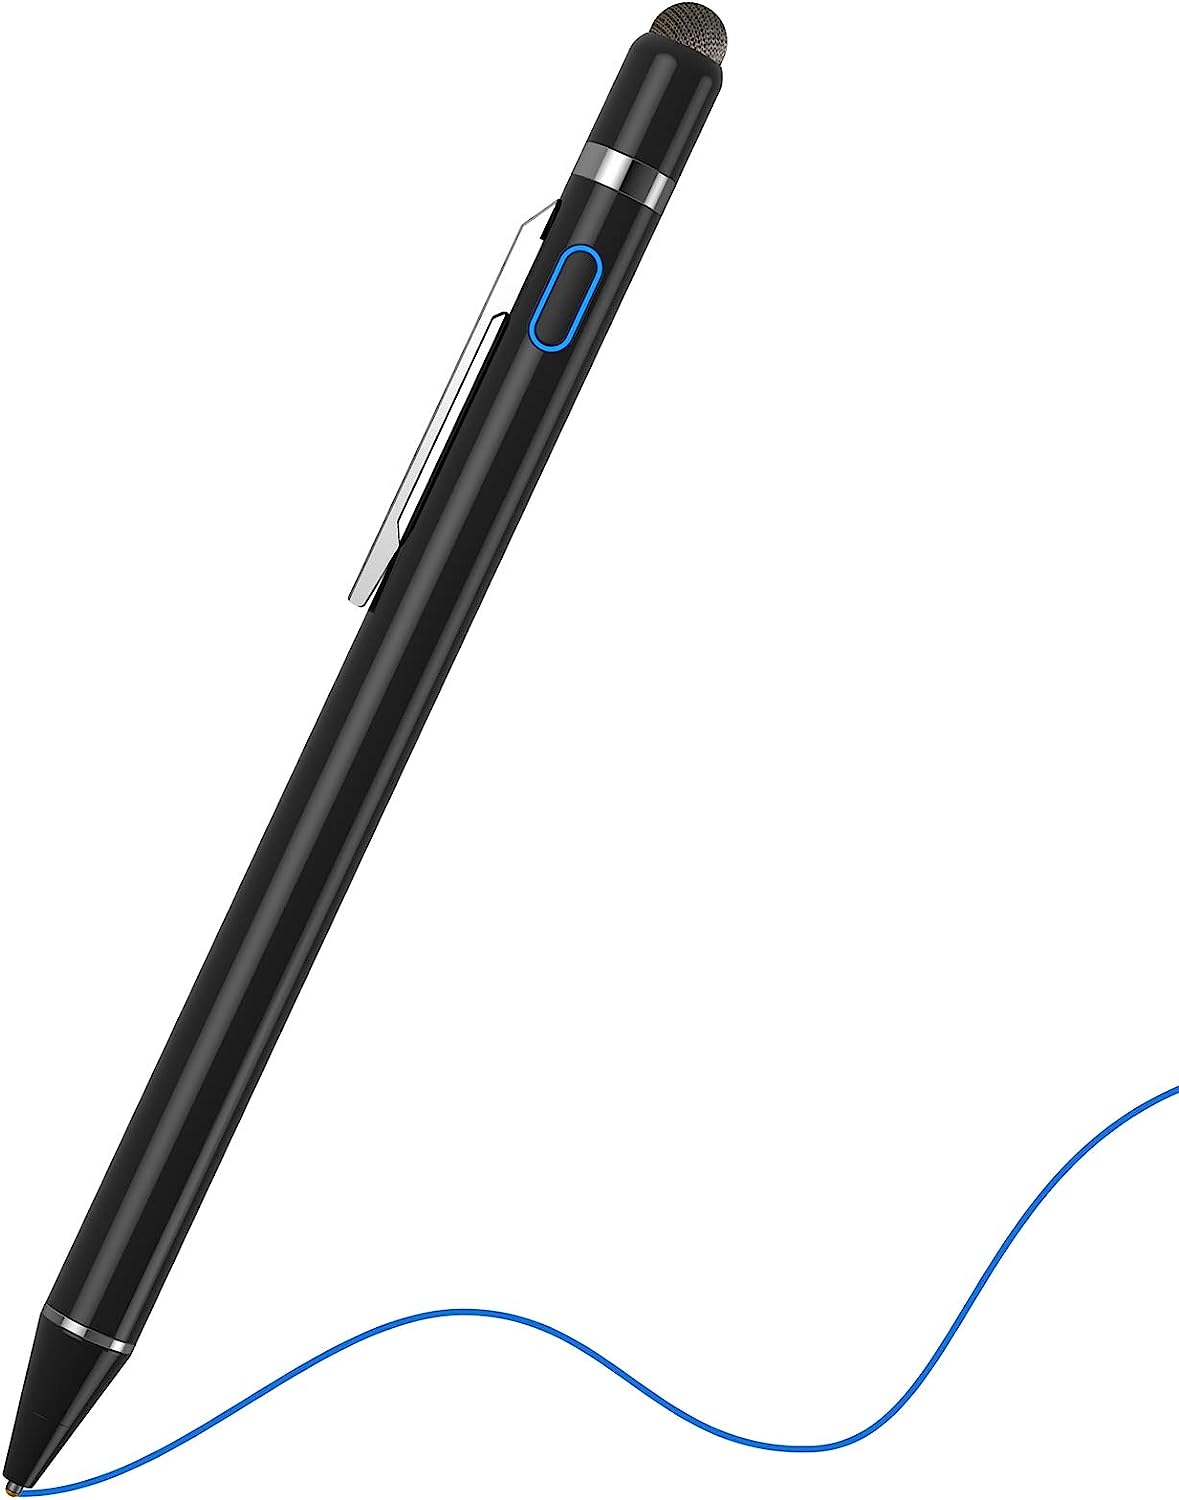 Stylus Pens for Touch Screens, NTHJOYS Universal Fine [...]